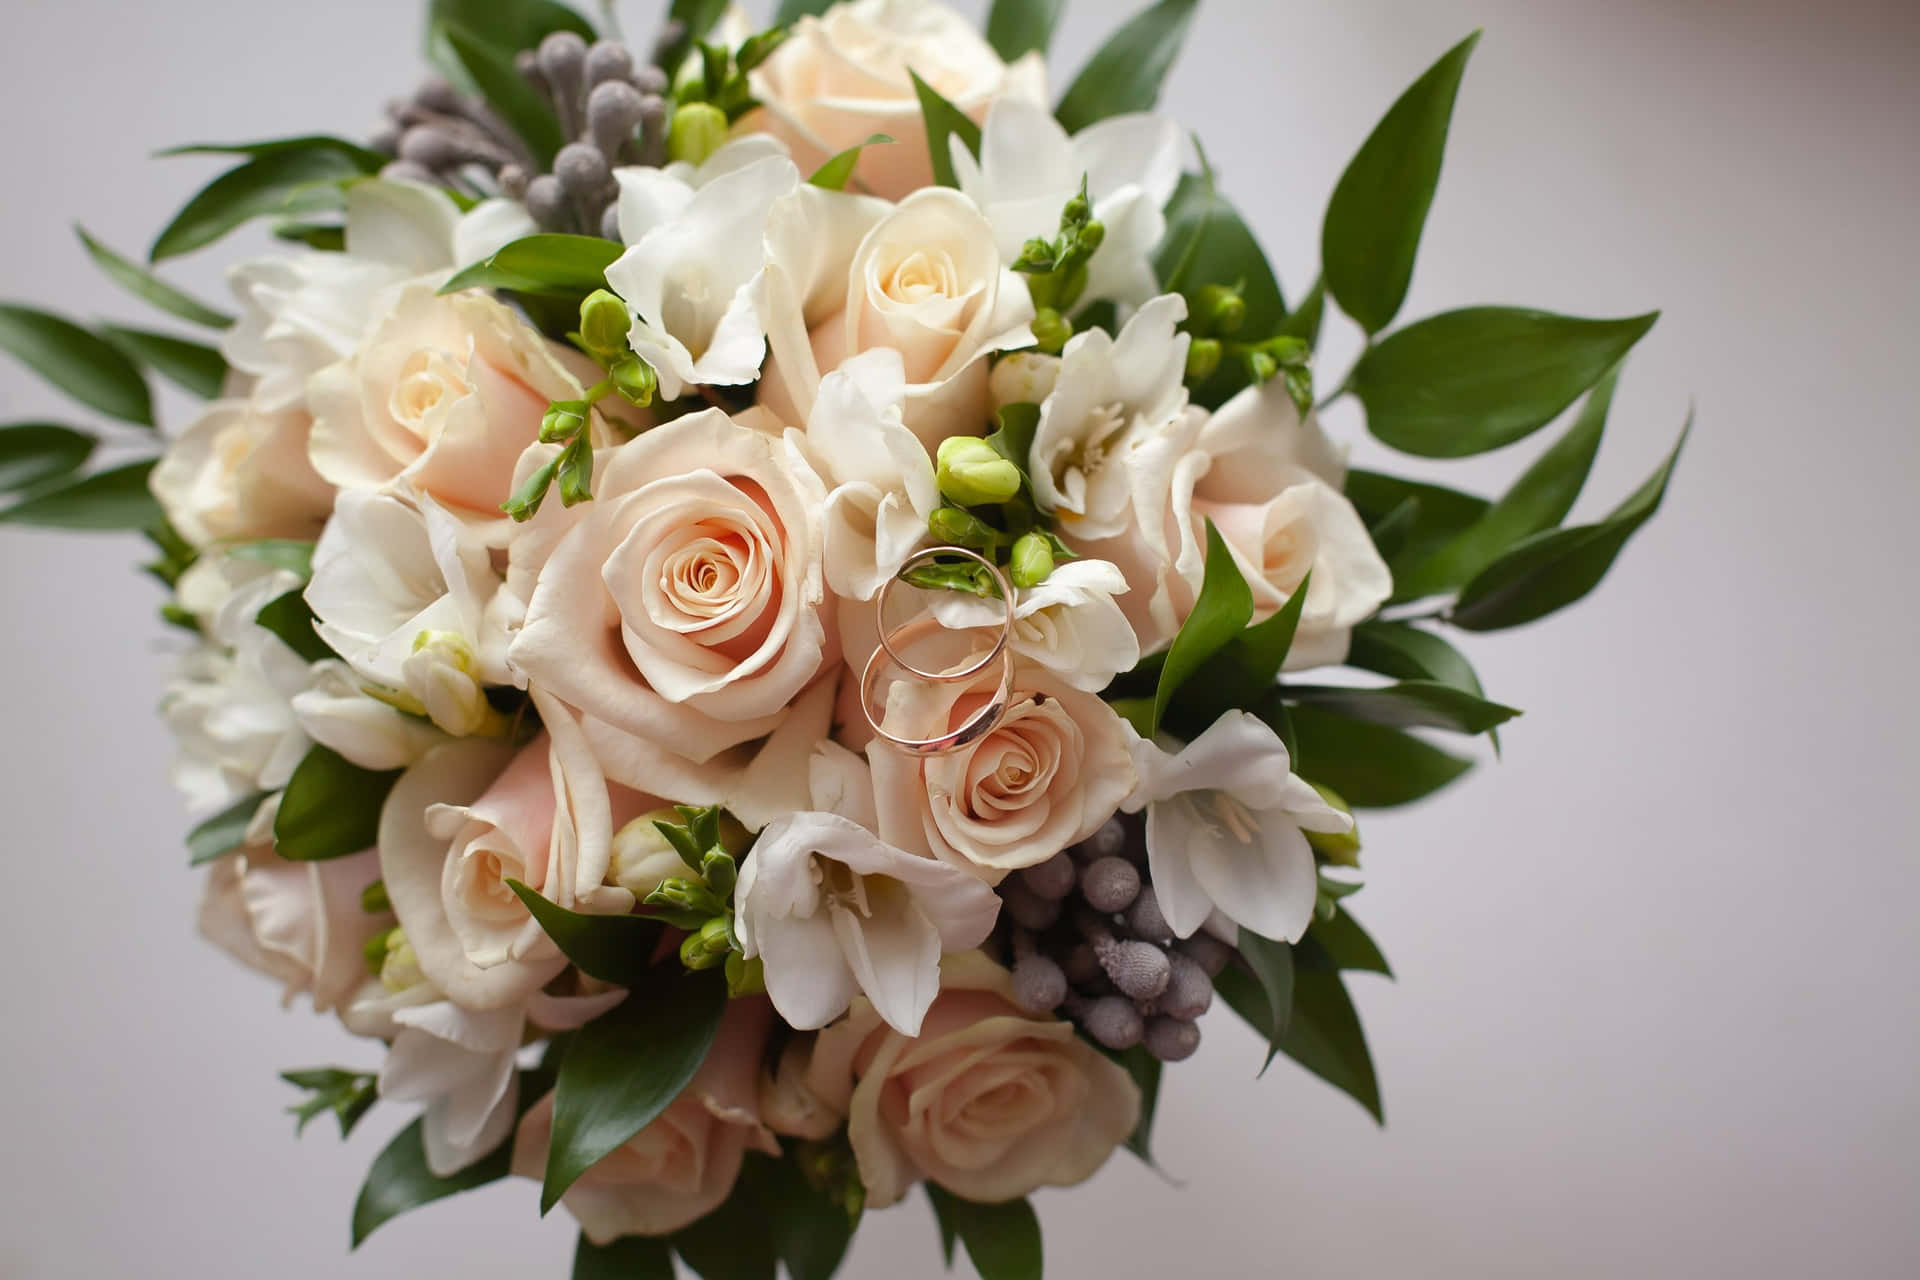 Elegant Wedding Bouquet with Vibrant Blooms and Greenery Wallpaper